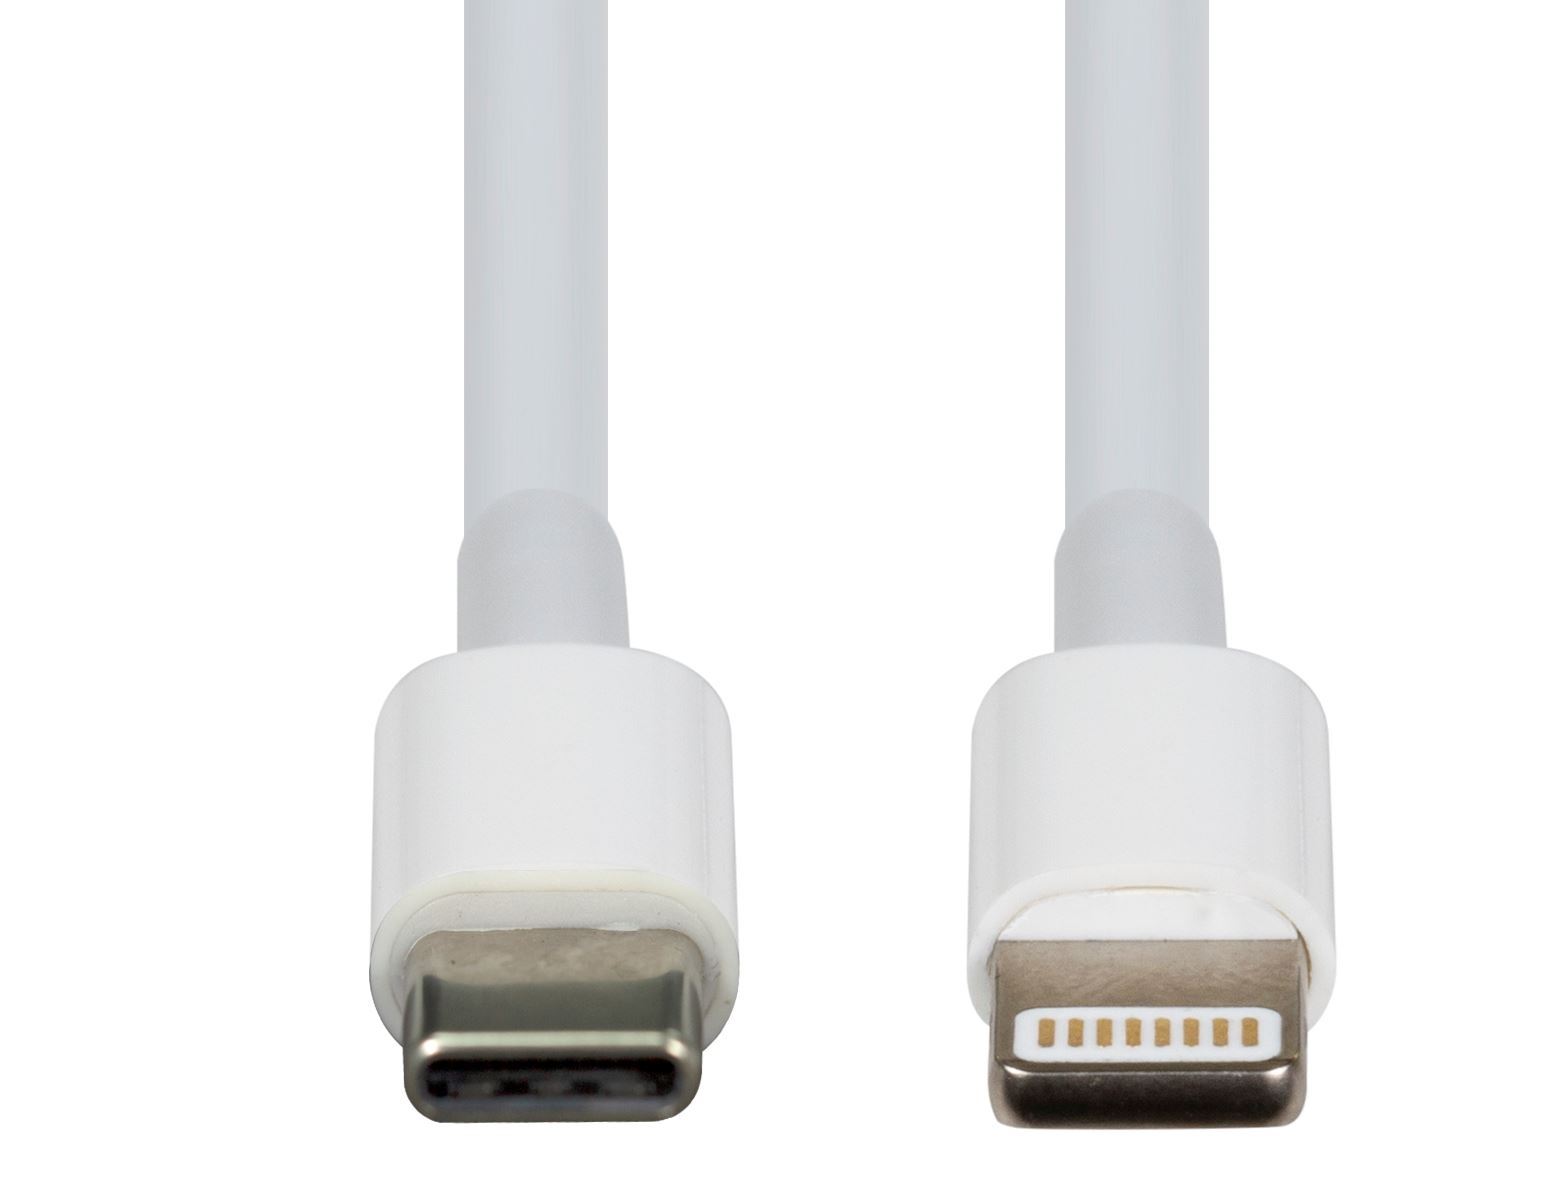 DYNAMIX_1m_USB-C_to_Lightning_Charge_&_Sync_Cable._For_Apple_iPhone,_iPad,_iPad_mini_&_iPods_*Not_MFI_Certified* 935